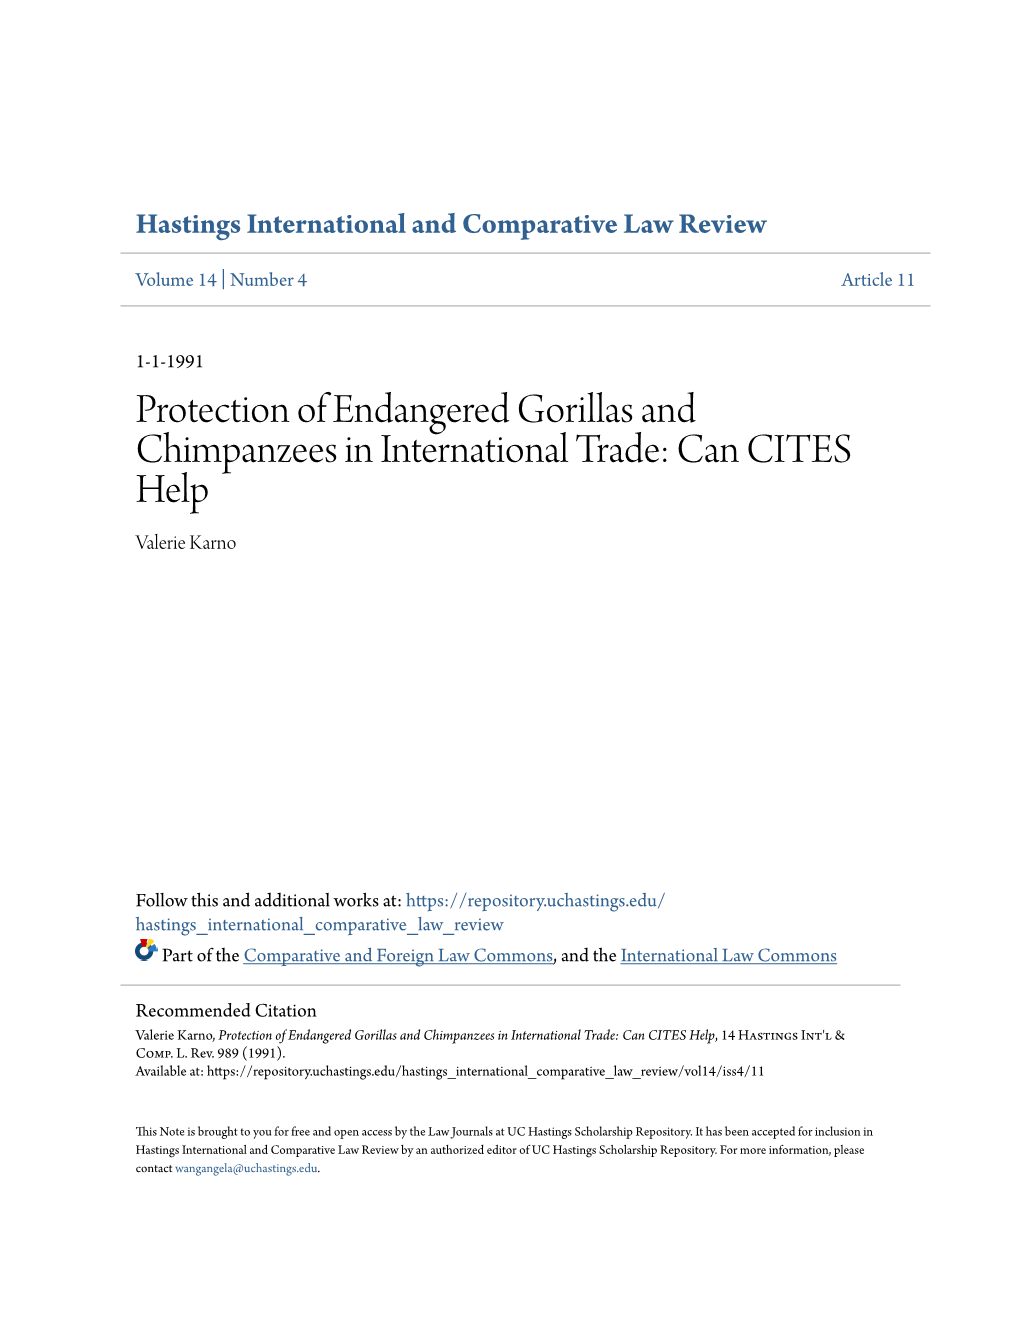 Protection of Endangered Gorillas and Chimpanzees in International Trade: Can CITES Help Valerie Karno